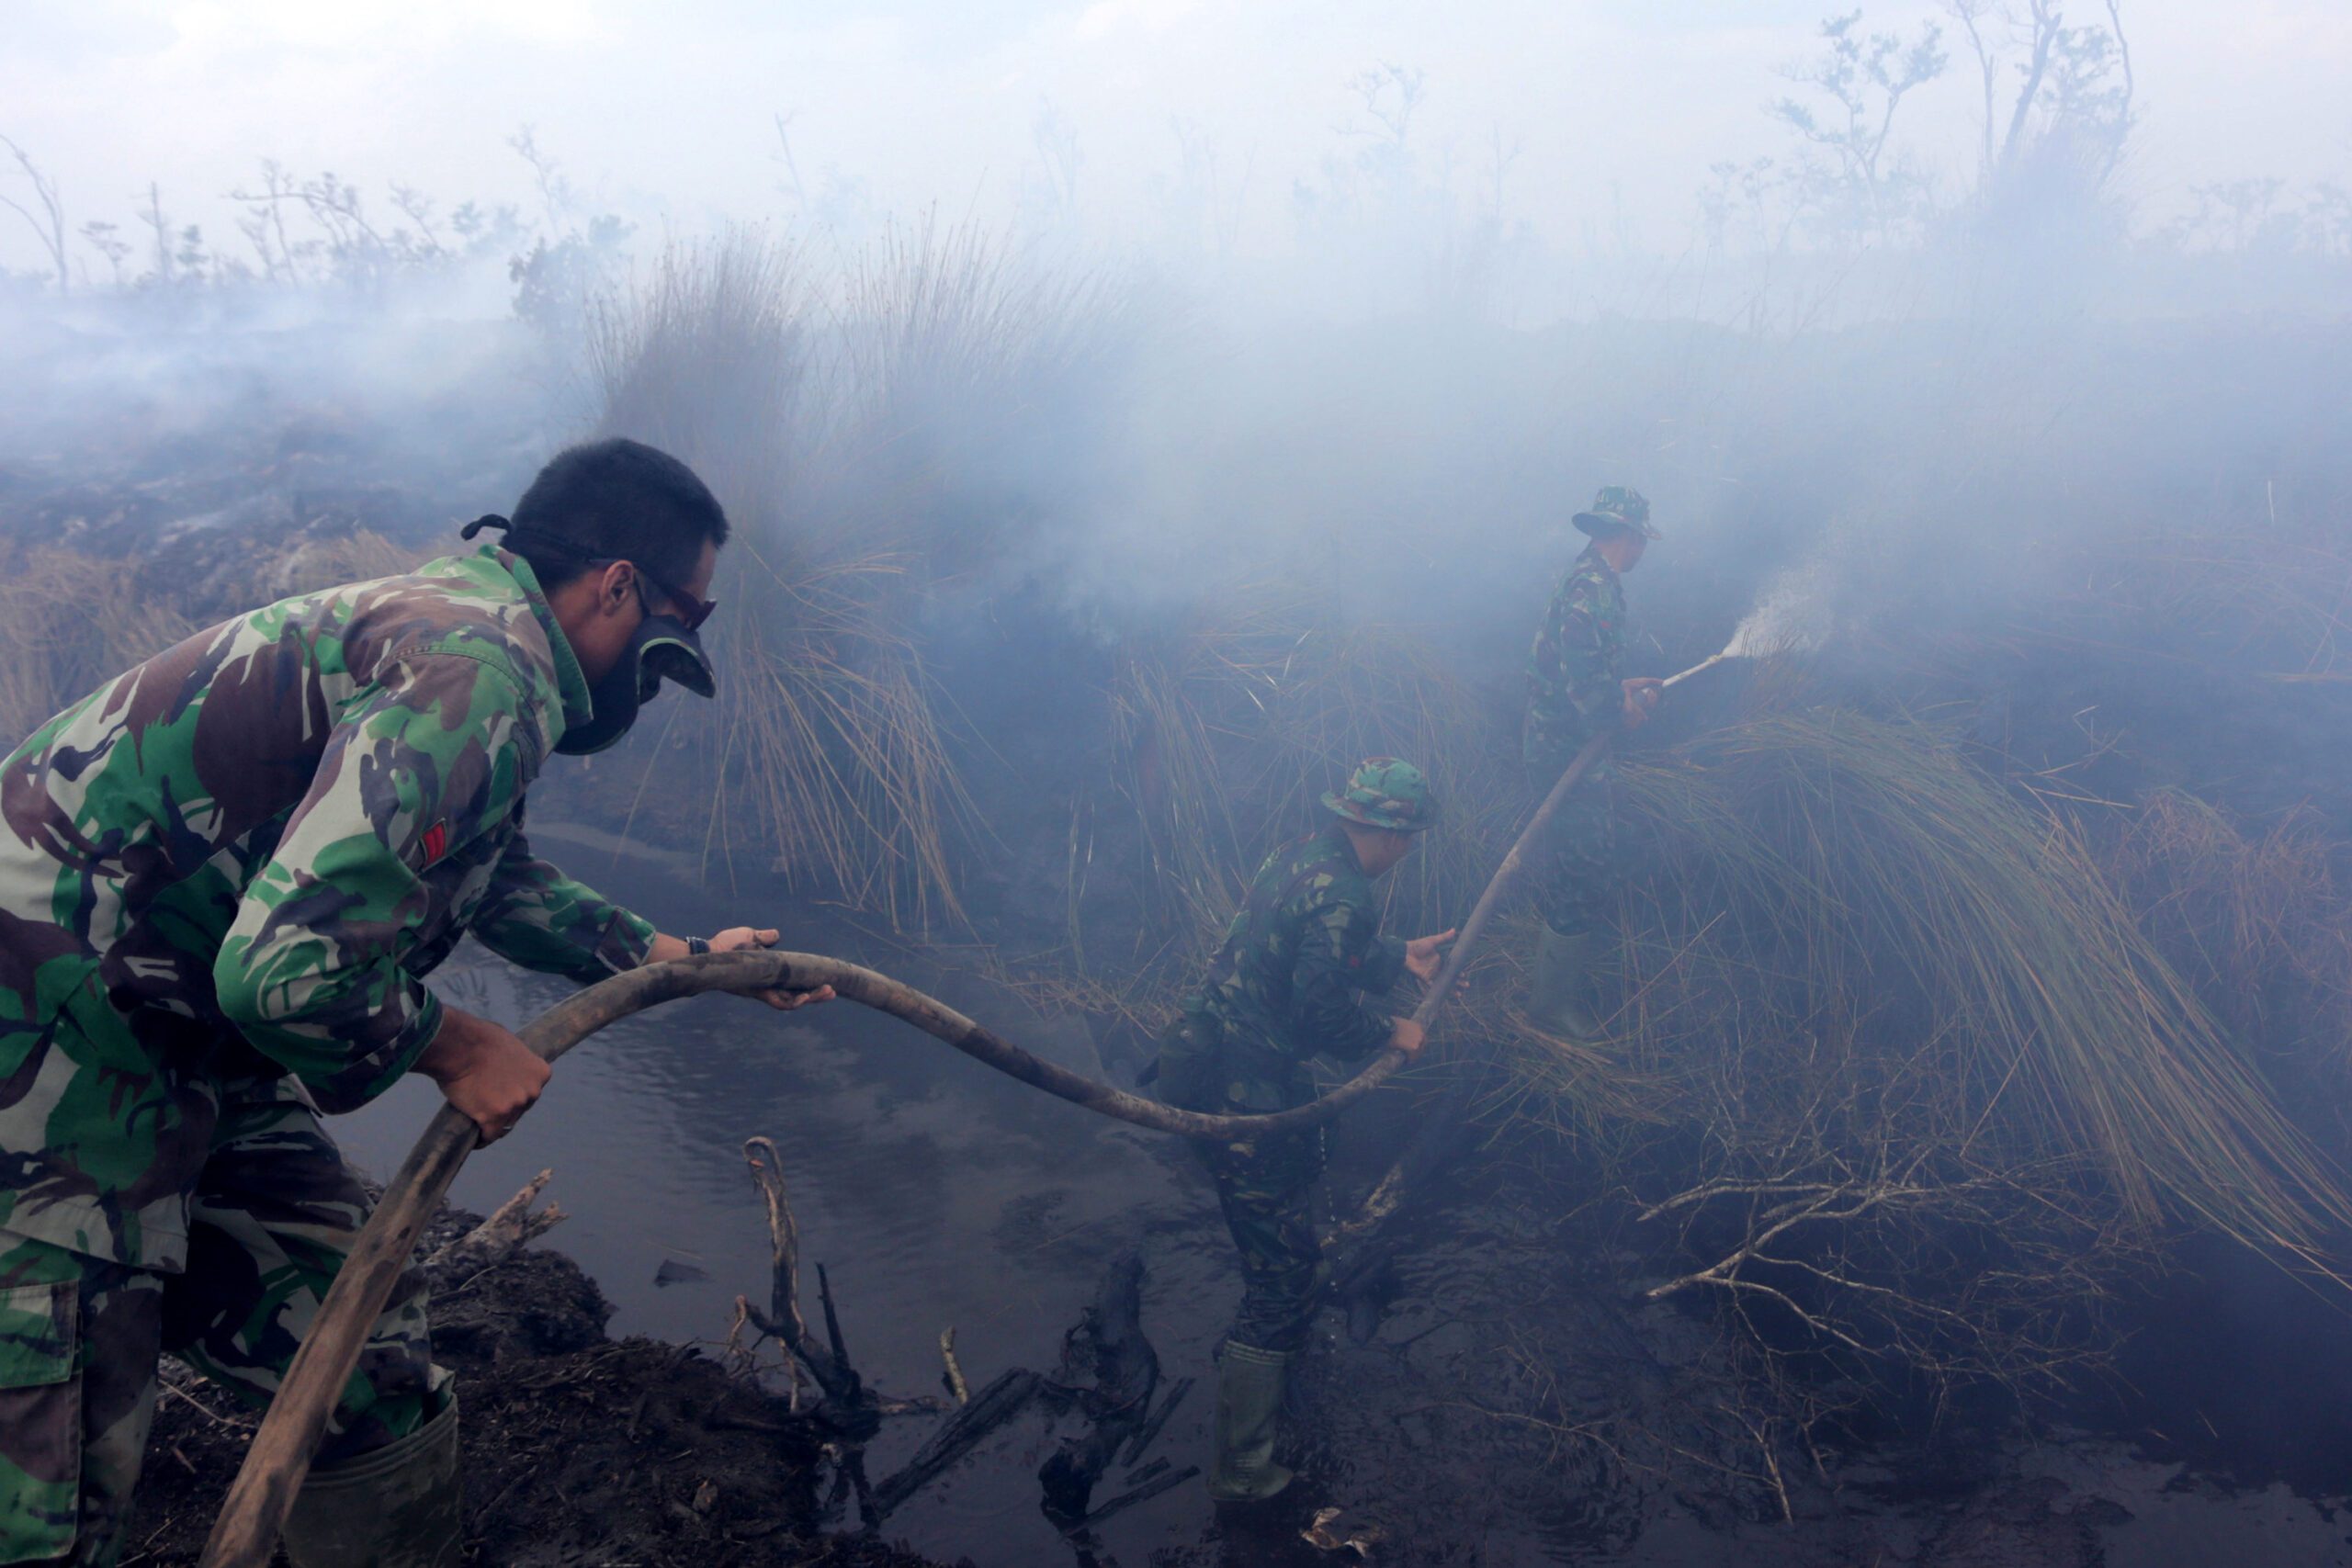 Indonesia finally accepts international help to combat fires